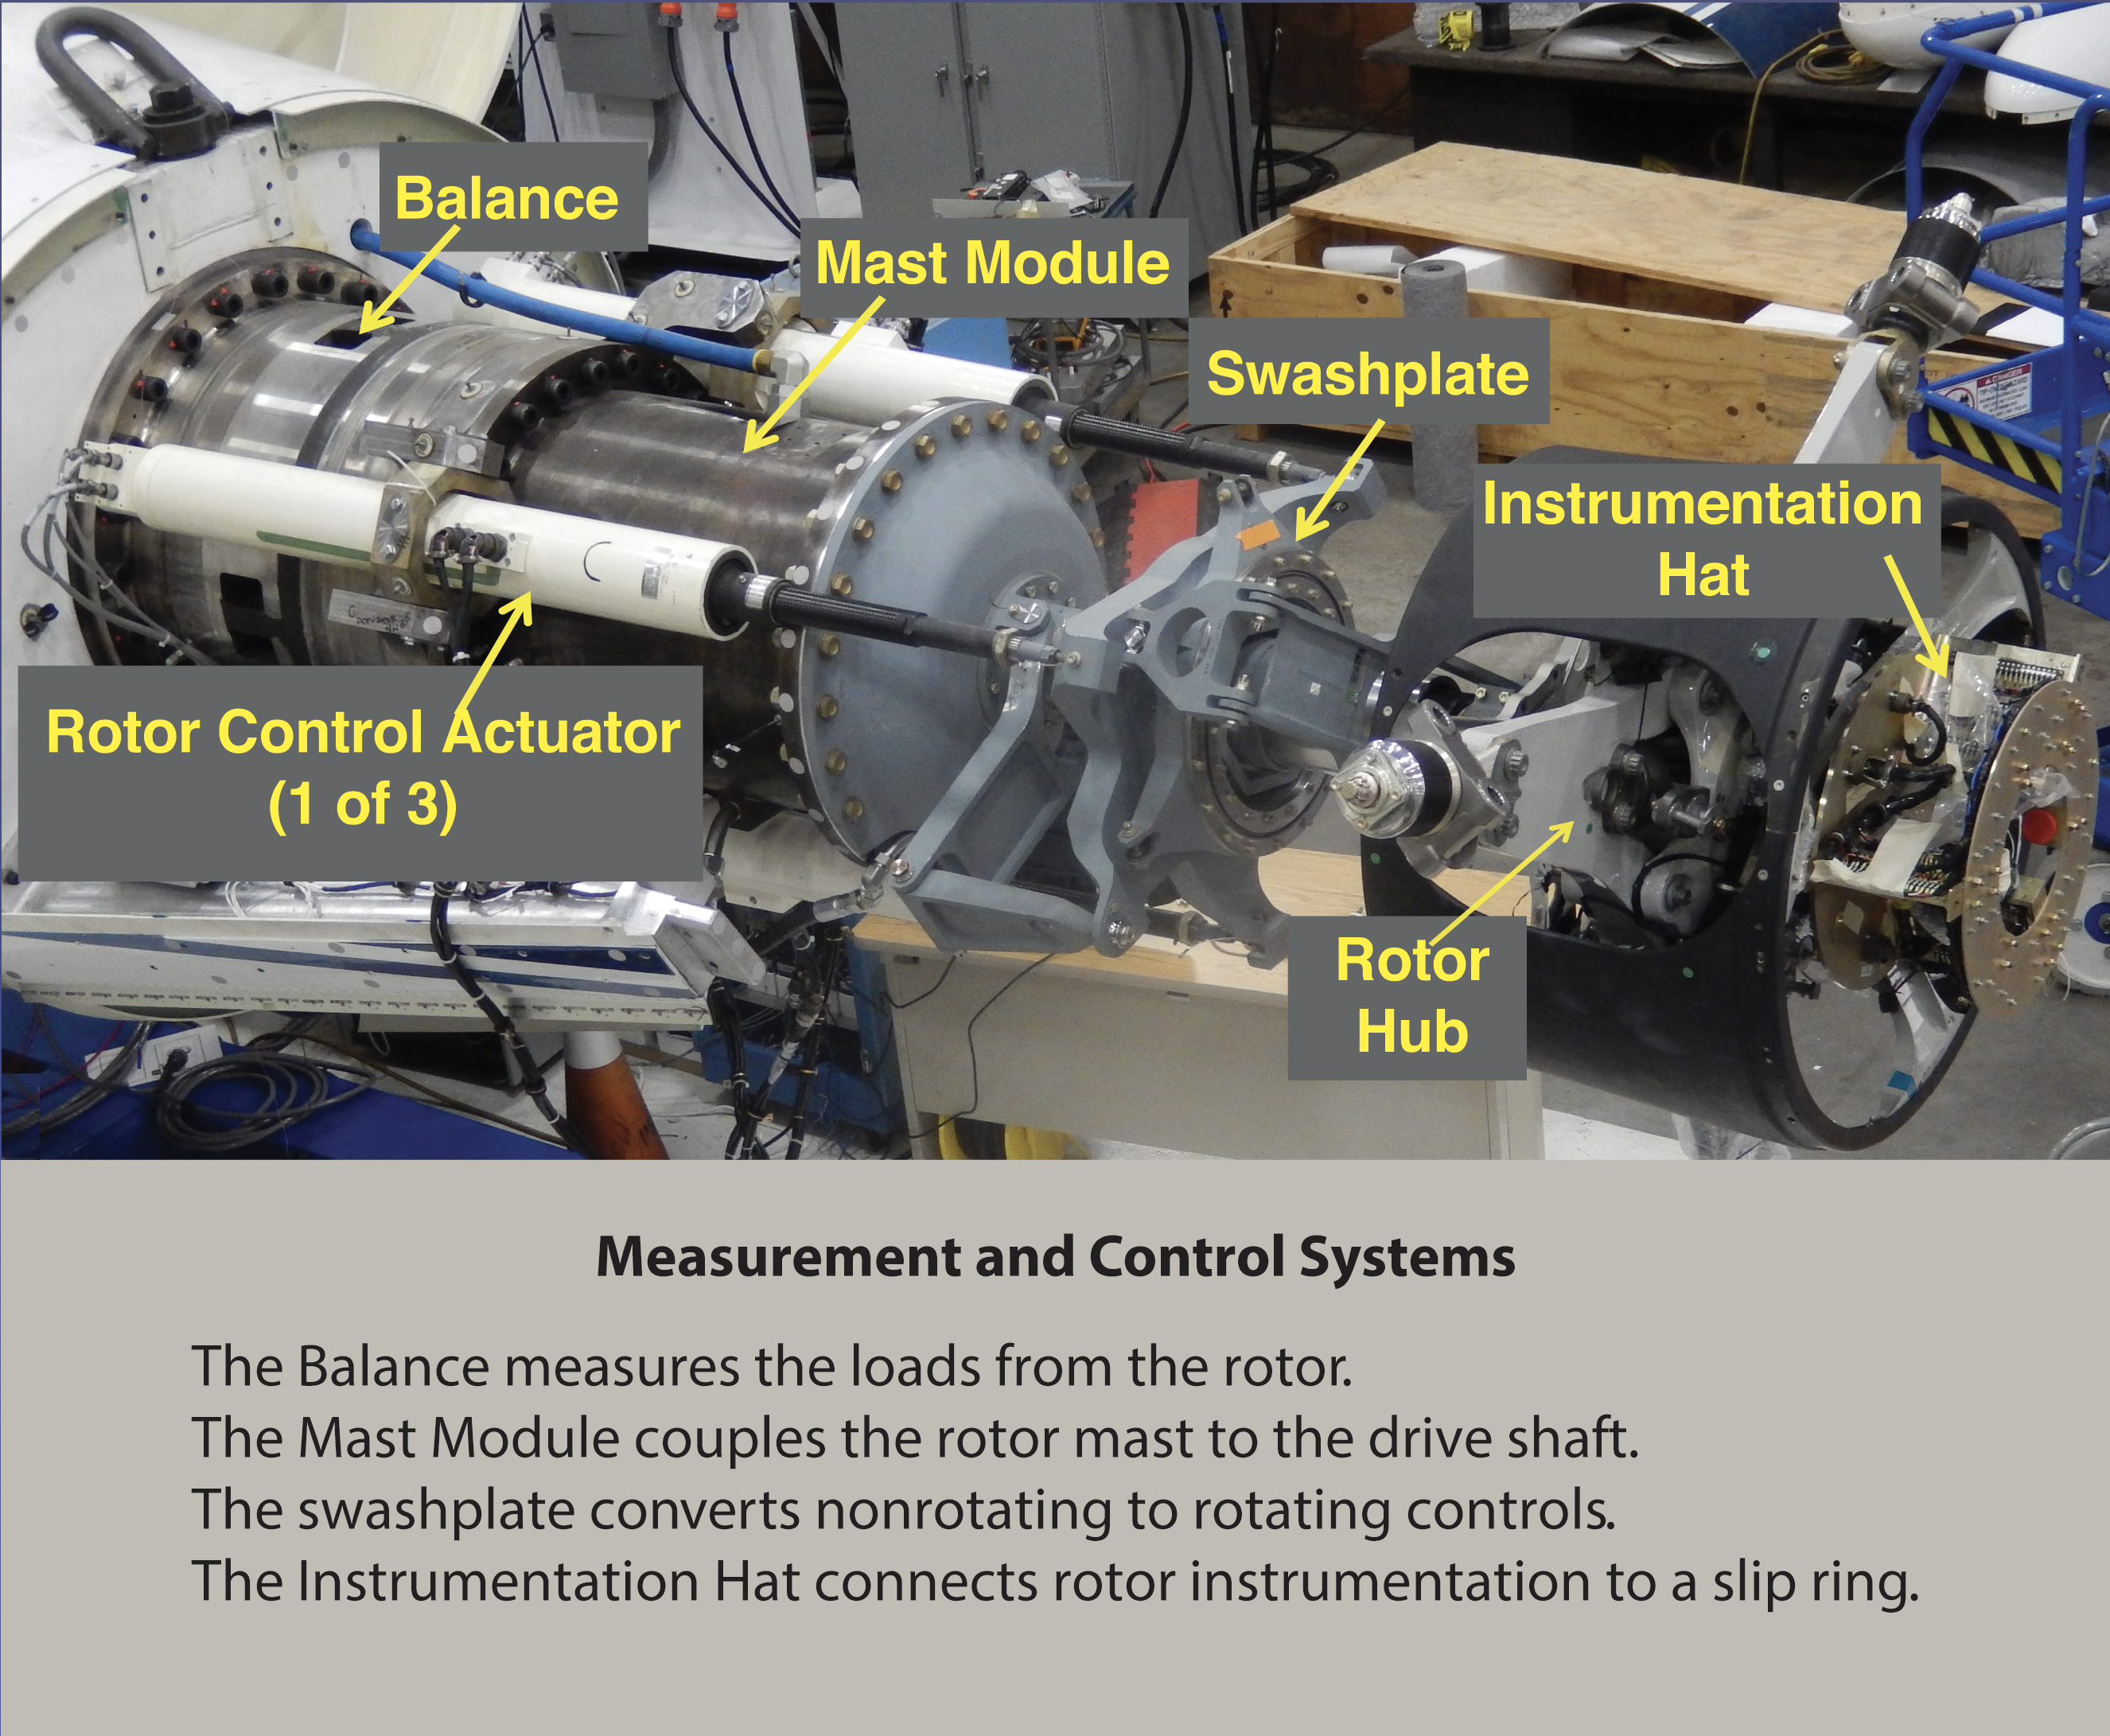 image of measurement and control systems